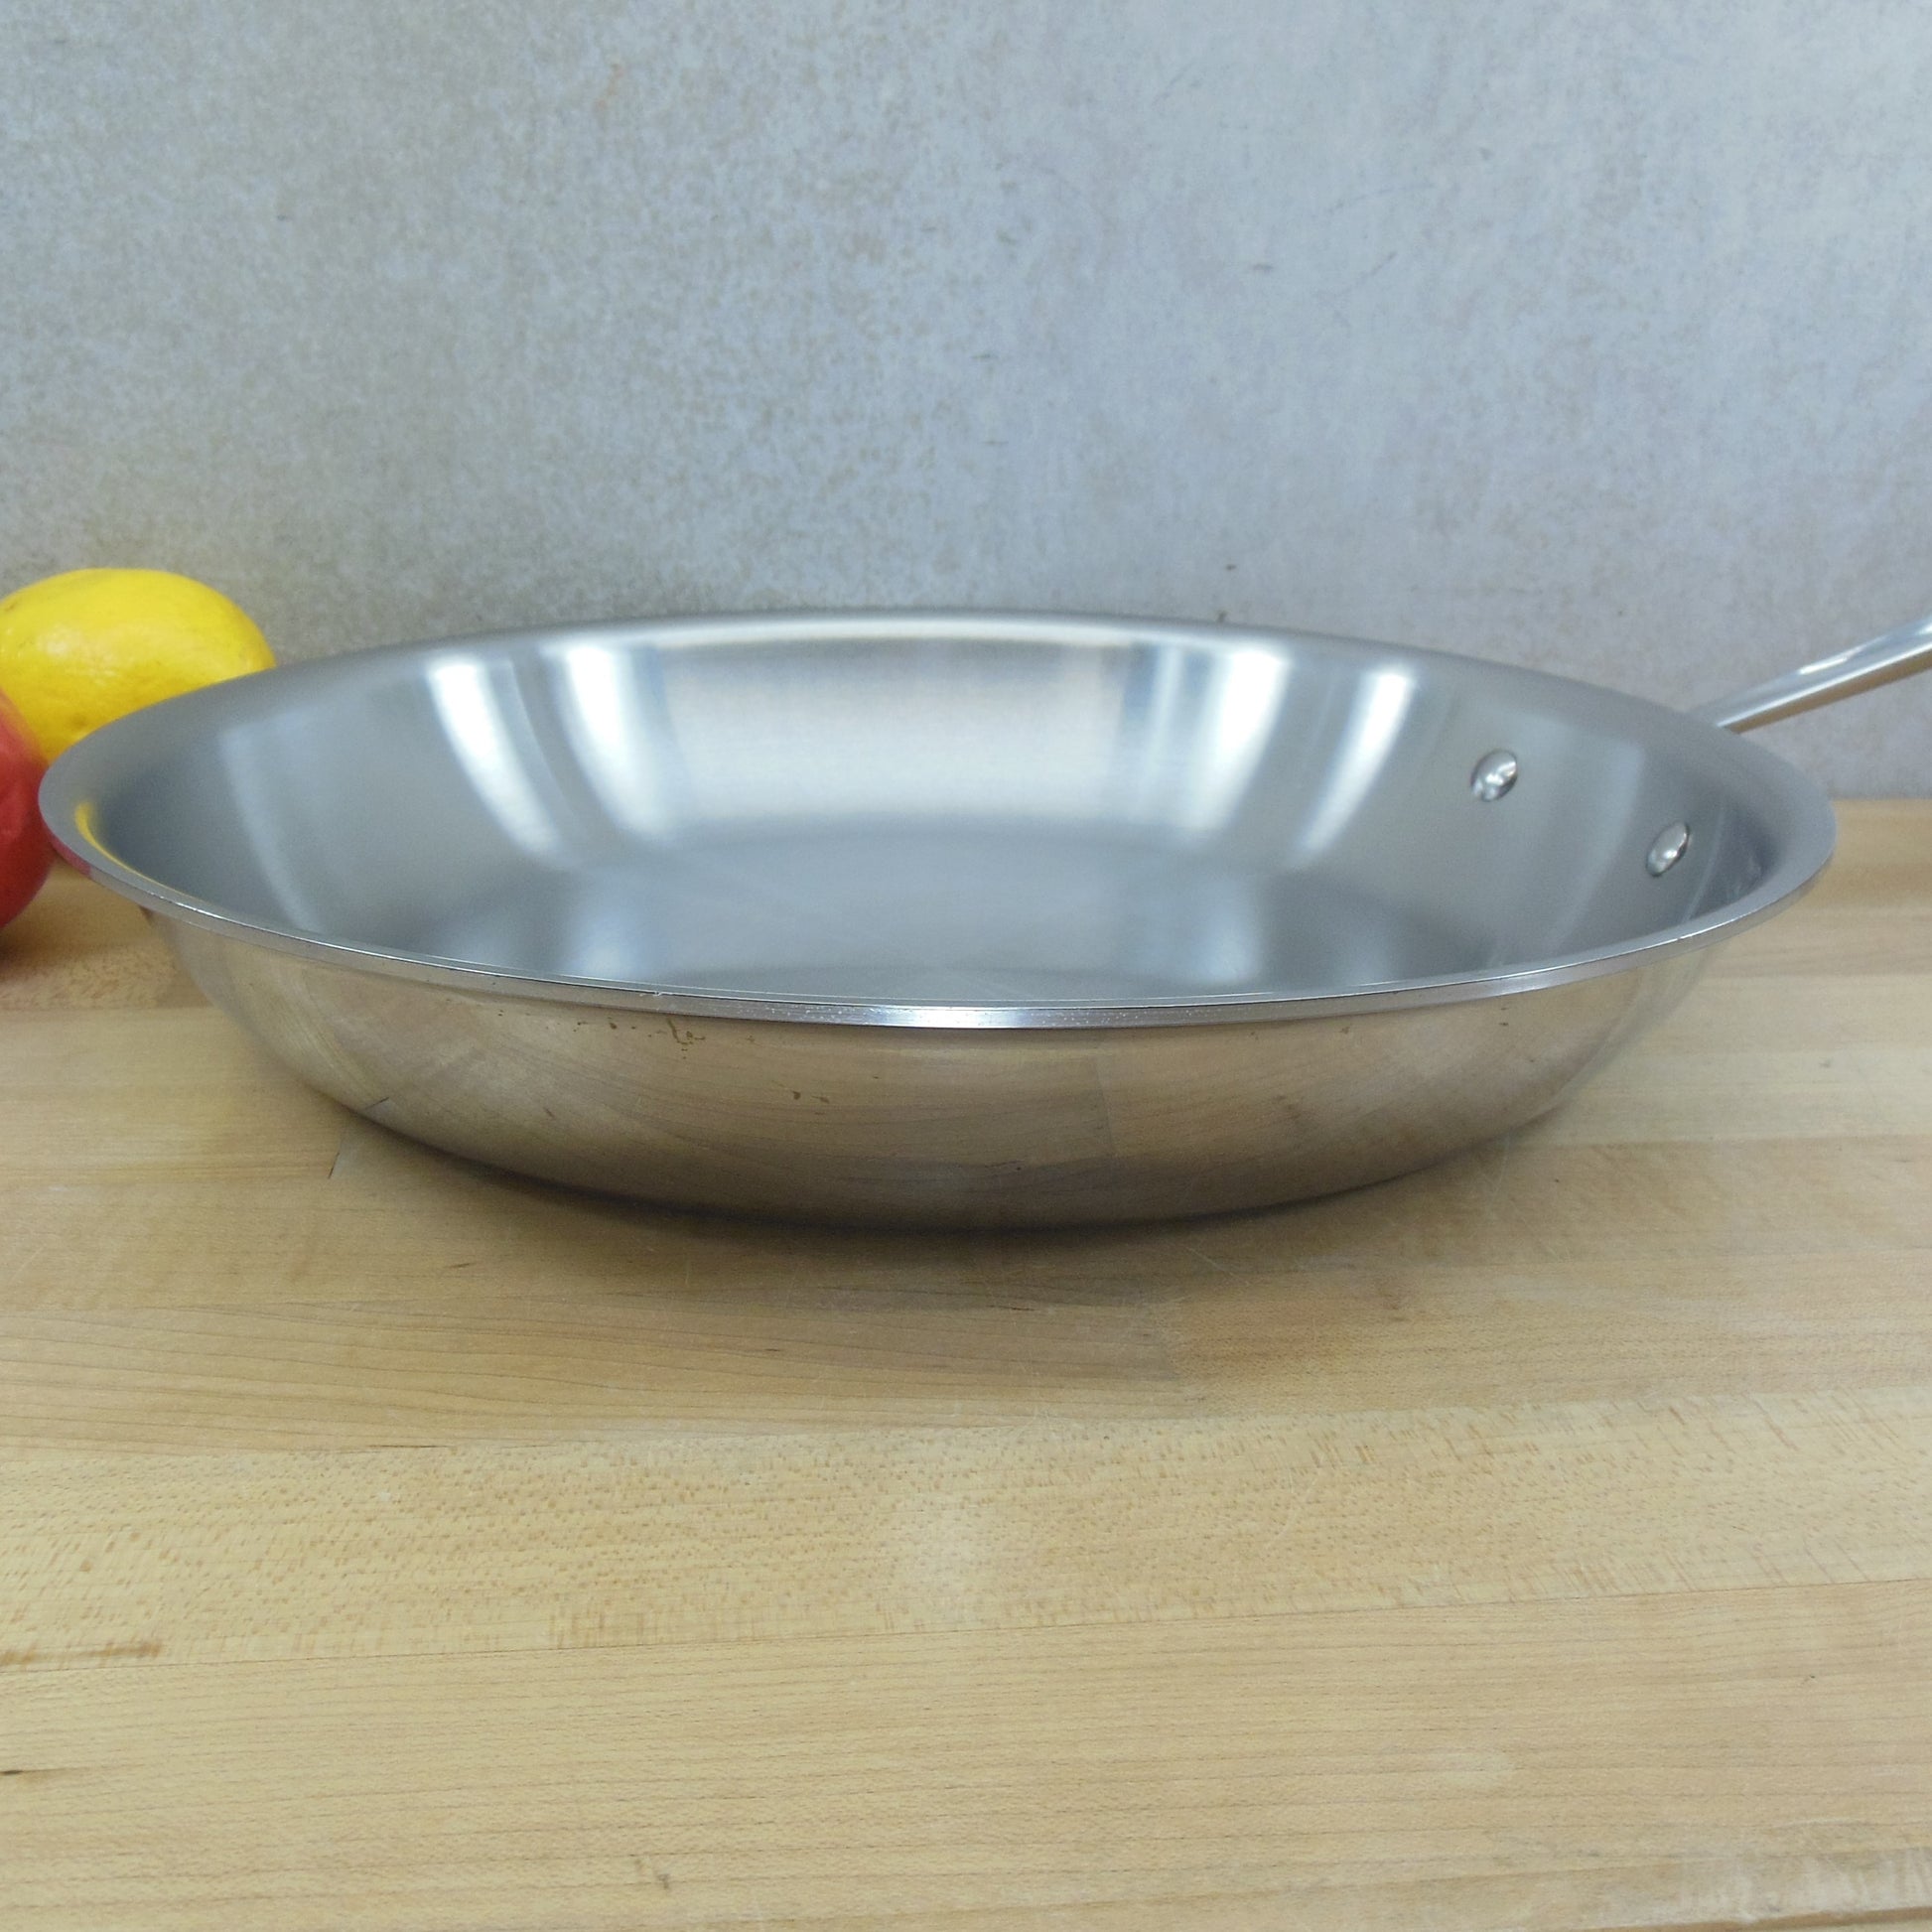 All-clad D3 Tri-ply Stainless Steel 12-inch Fry Pan Skillet Sauté Pan 